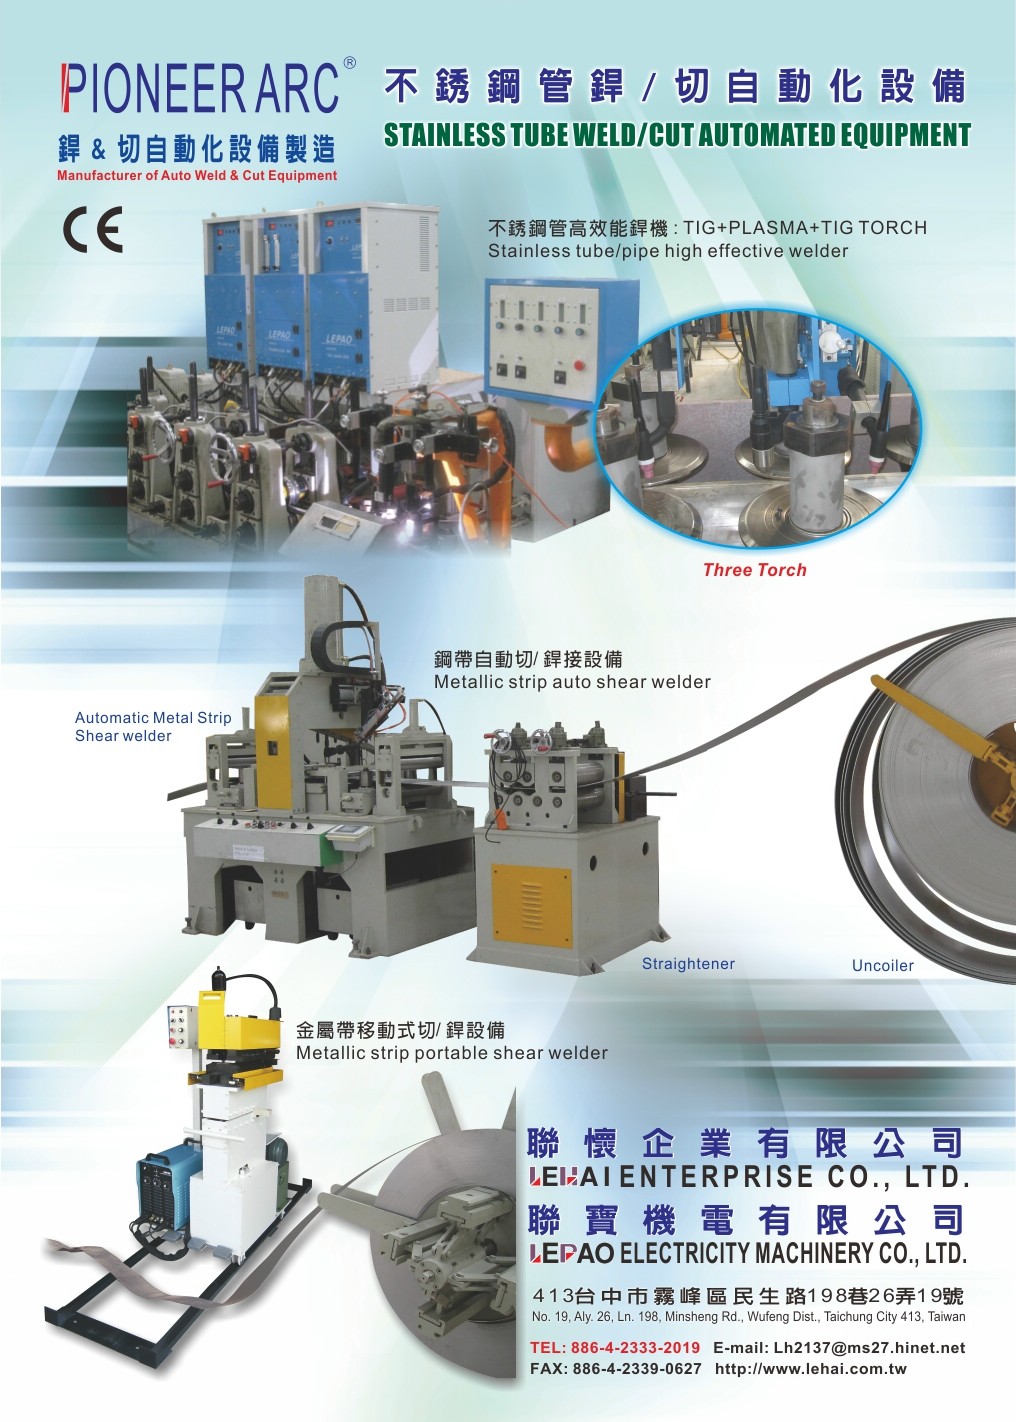 Stainless Tube Weld ／ Cut Automated Equipment-不銹鋼管銲／切自動化設備(Stainless Tube Weld ／ Cut Automated Equipment)